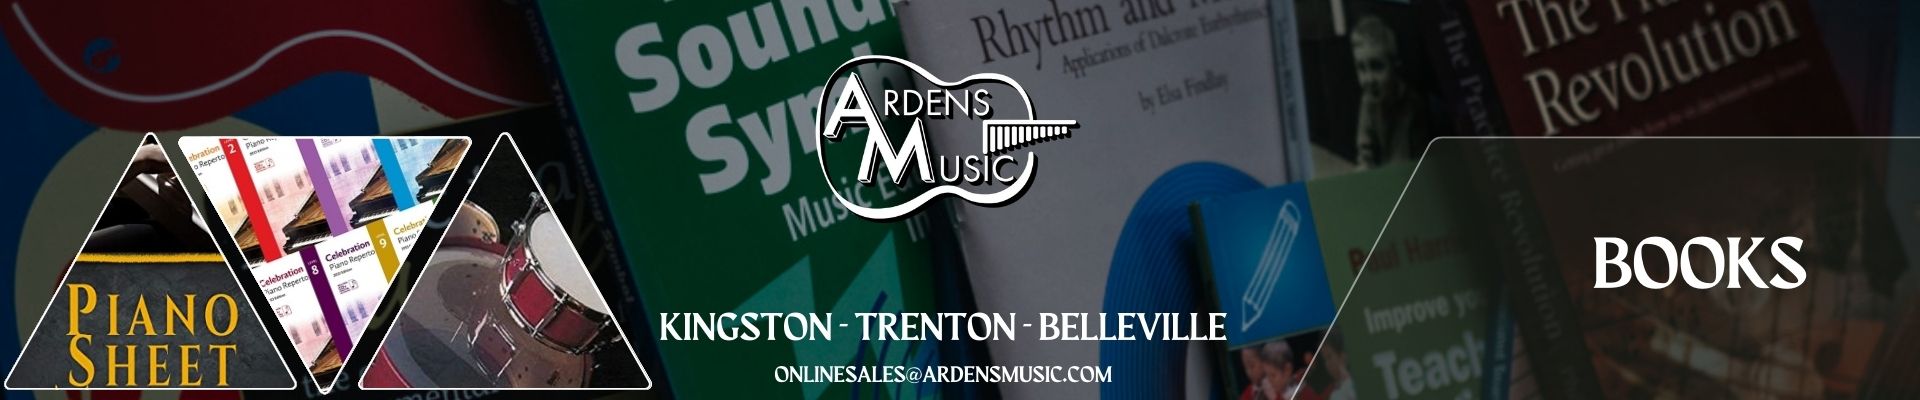 Take advantage of Ardens Music as your one-stop shop for all your musical notation and learning media needs, including RCM study, etude and Tab books. With a wide range of options, we are your ultimate destination for all things music education.